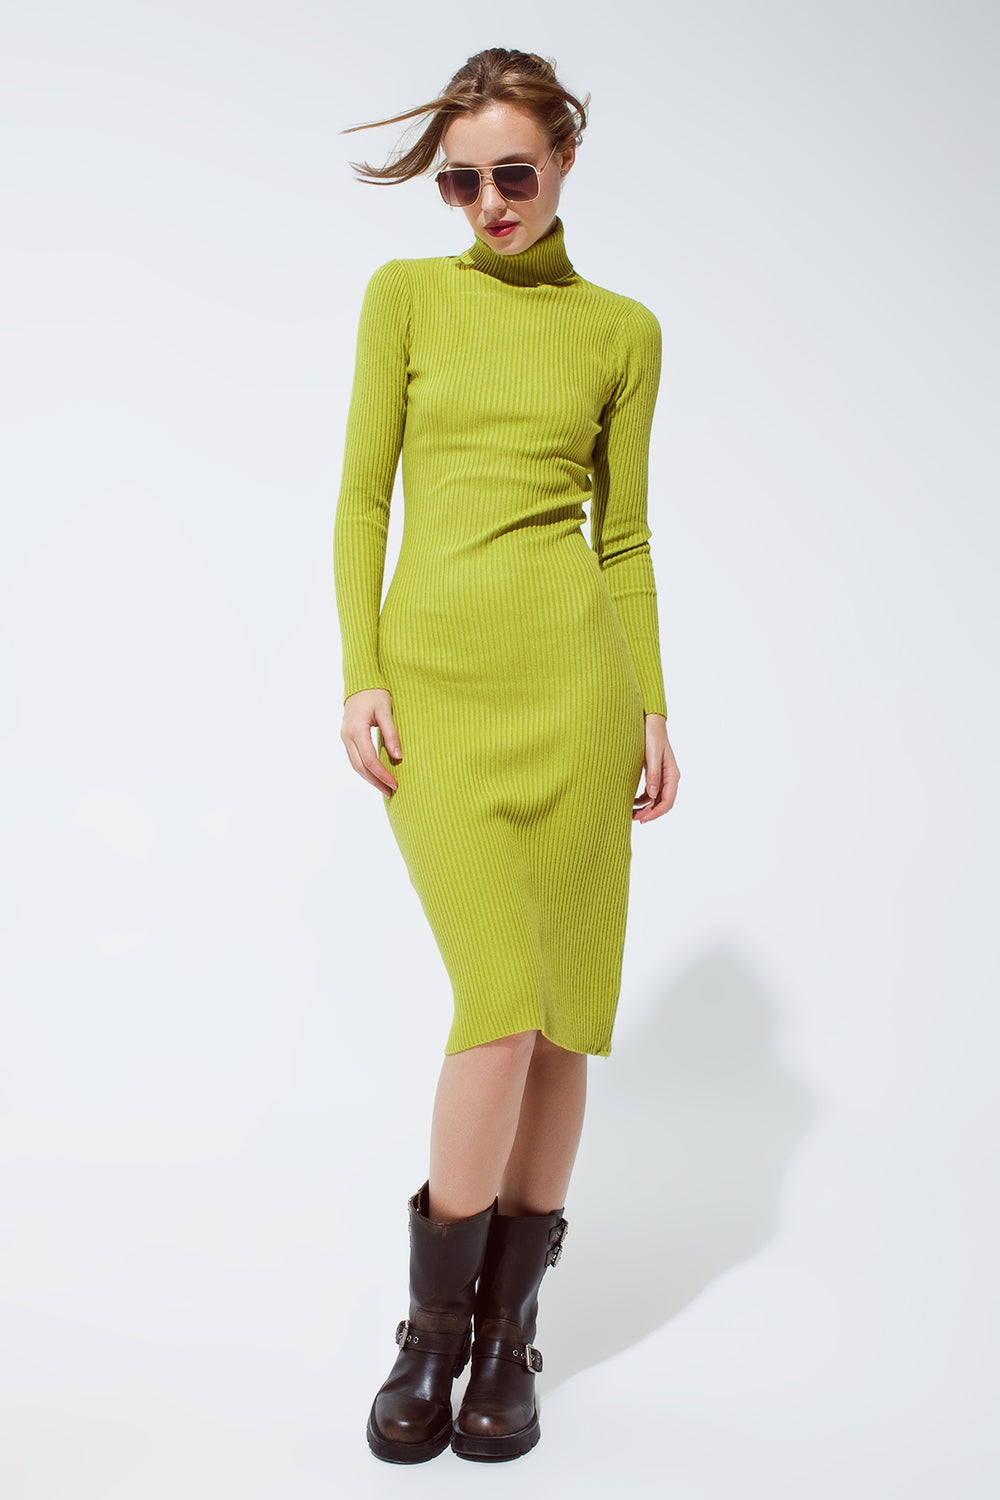 MIDI dress in green with turtle neck